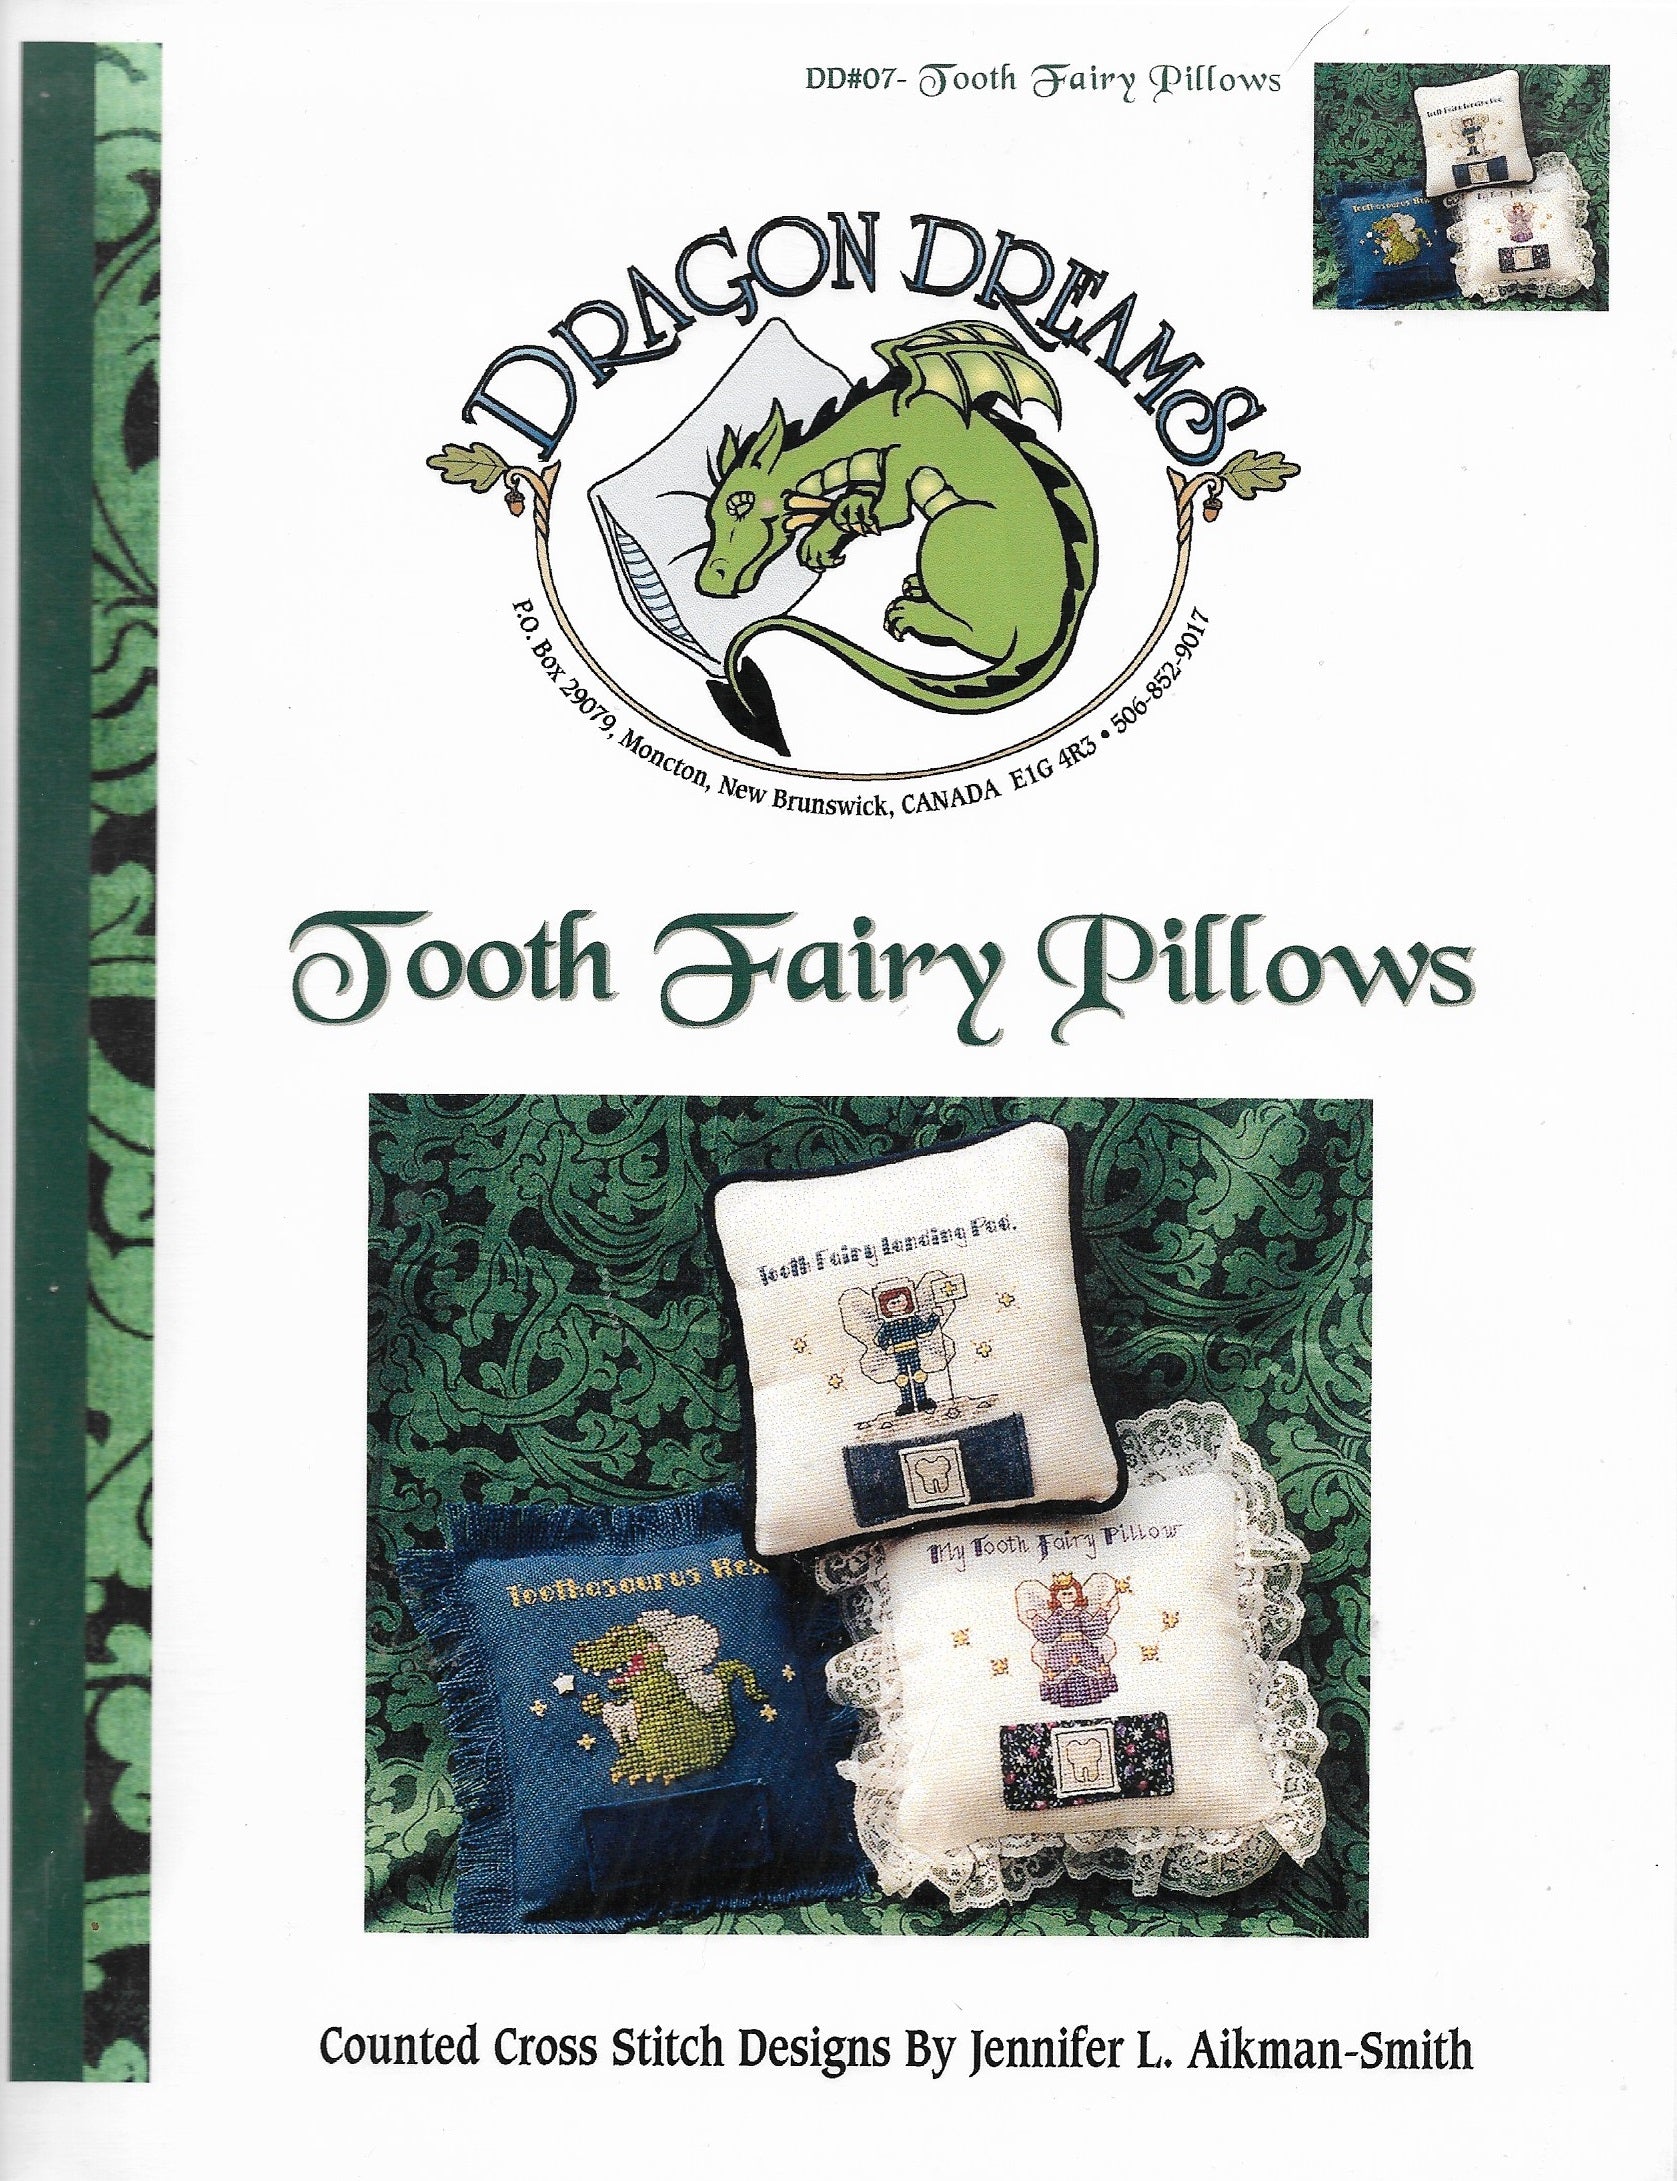 Dragon Dreams Tooth Fairy Pillows cross stitch pattern